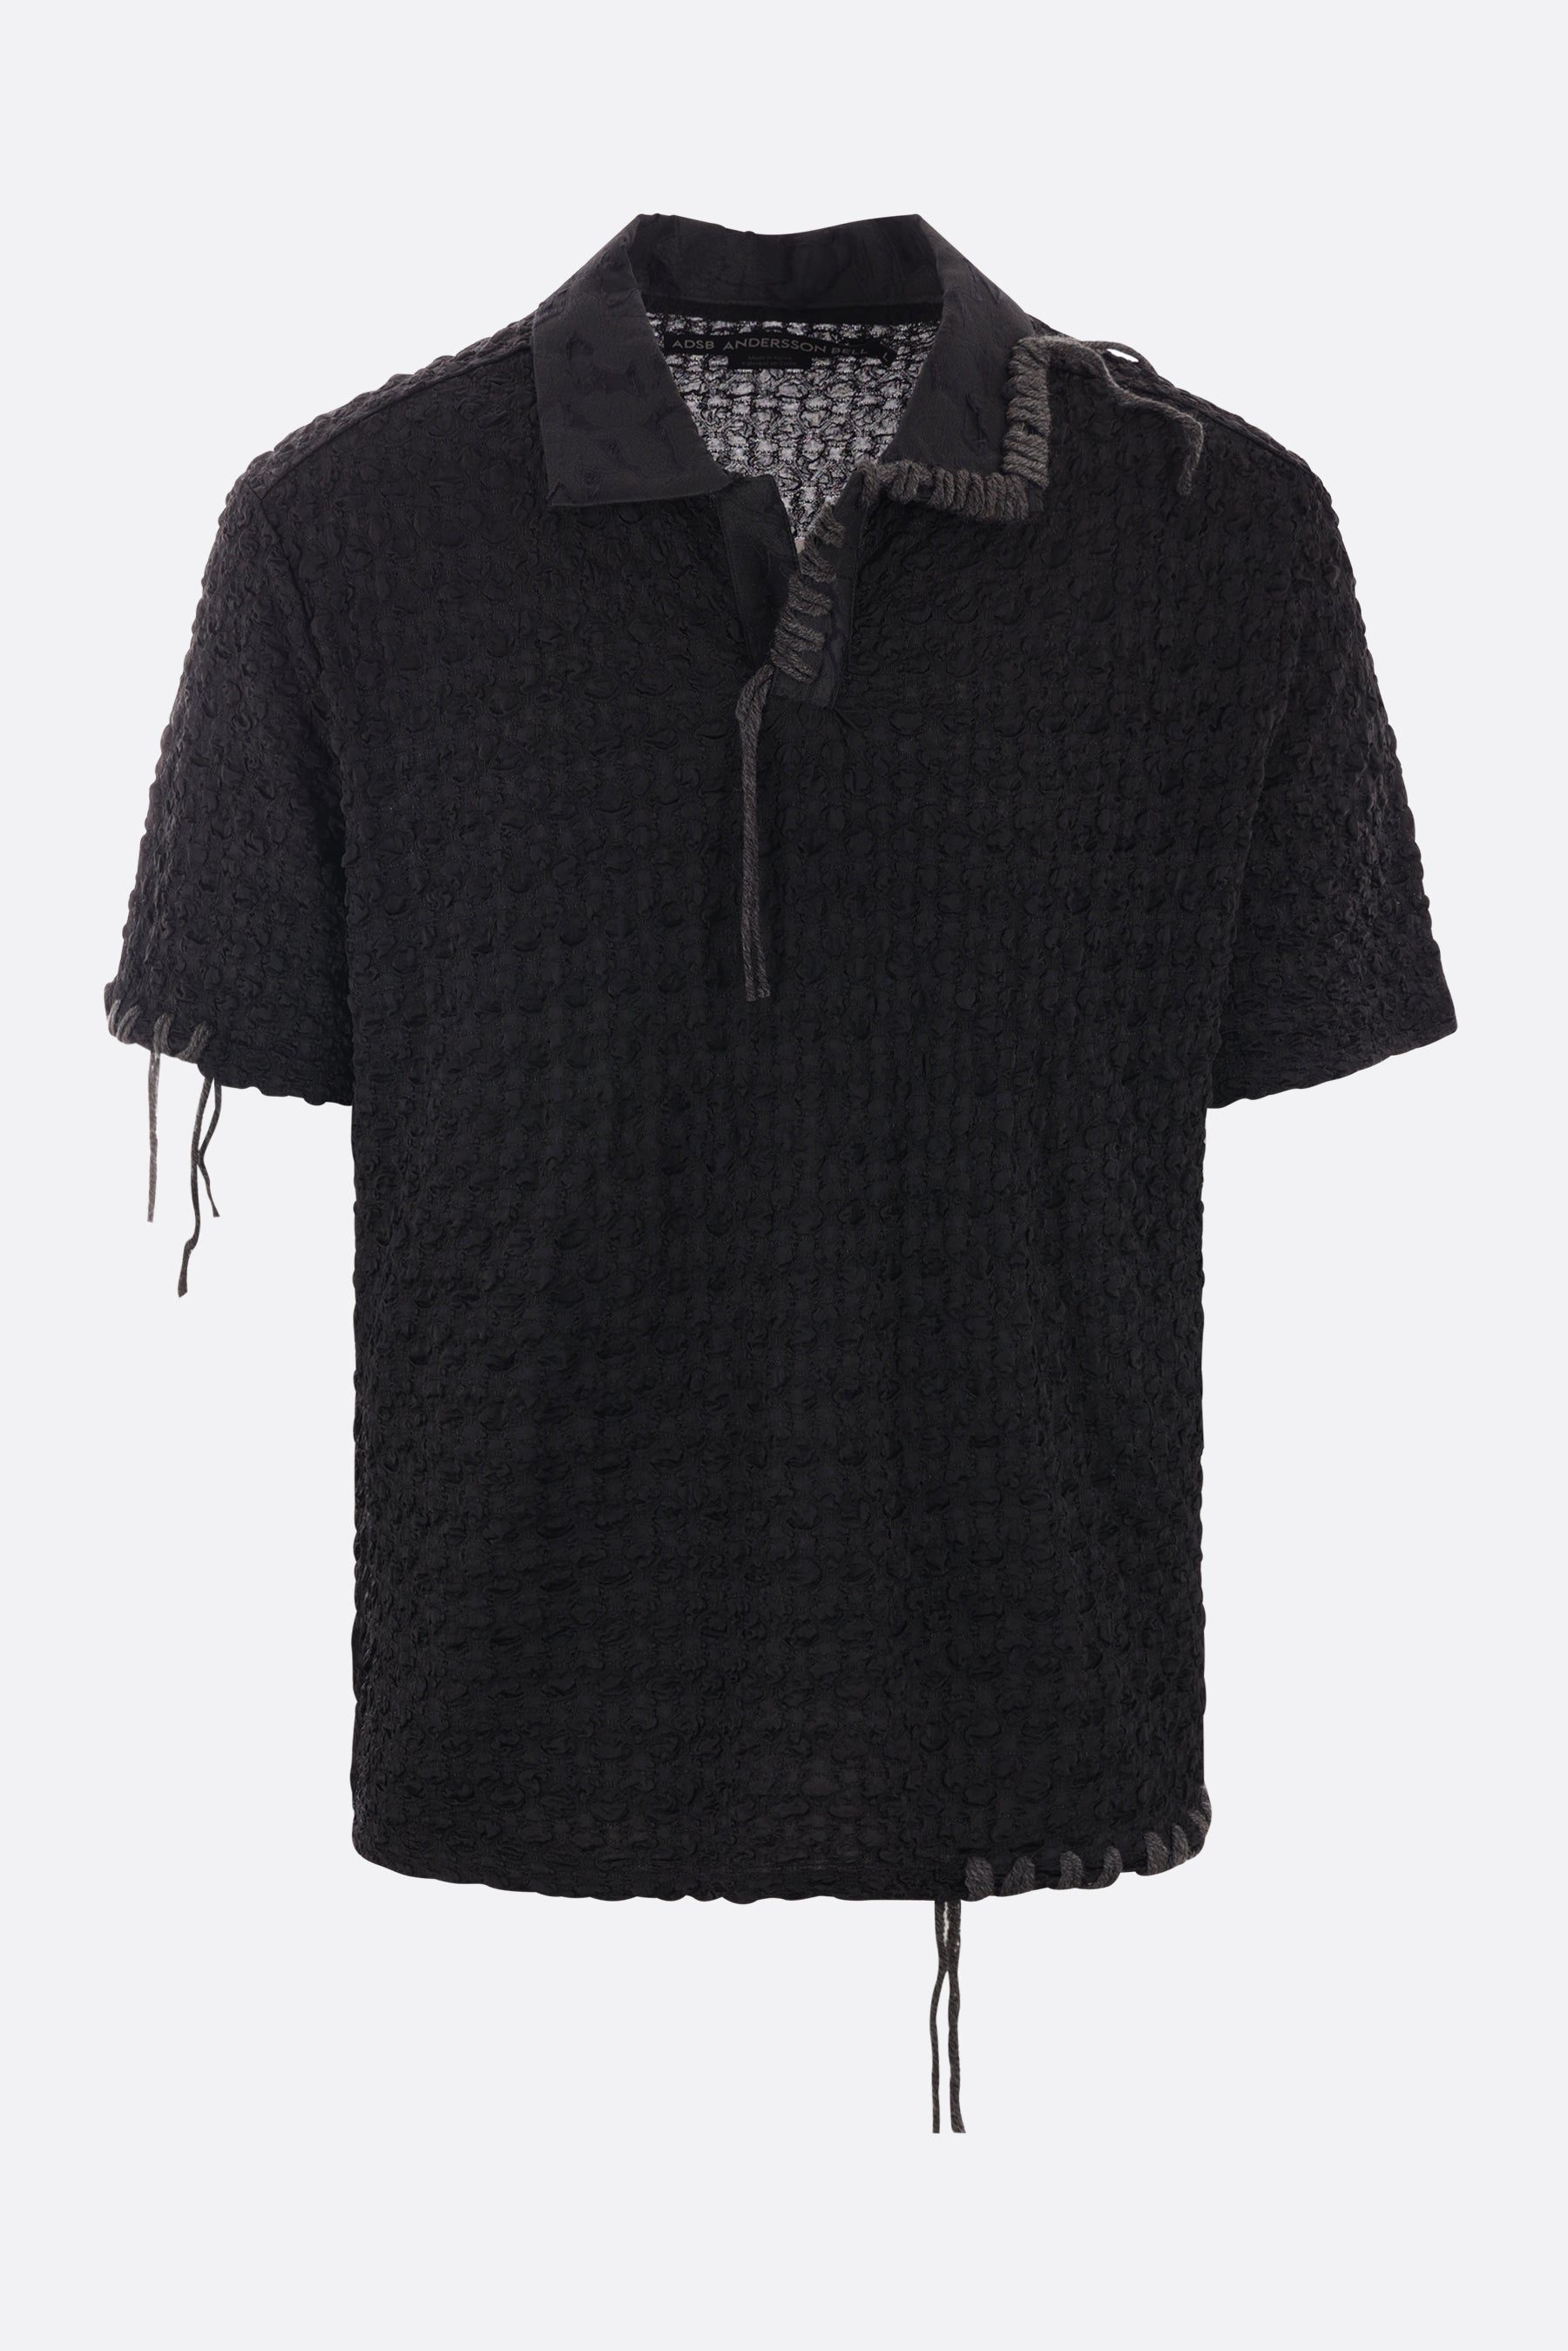 Sapa Bubble Knit textured technical fabric top